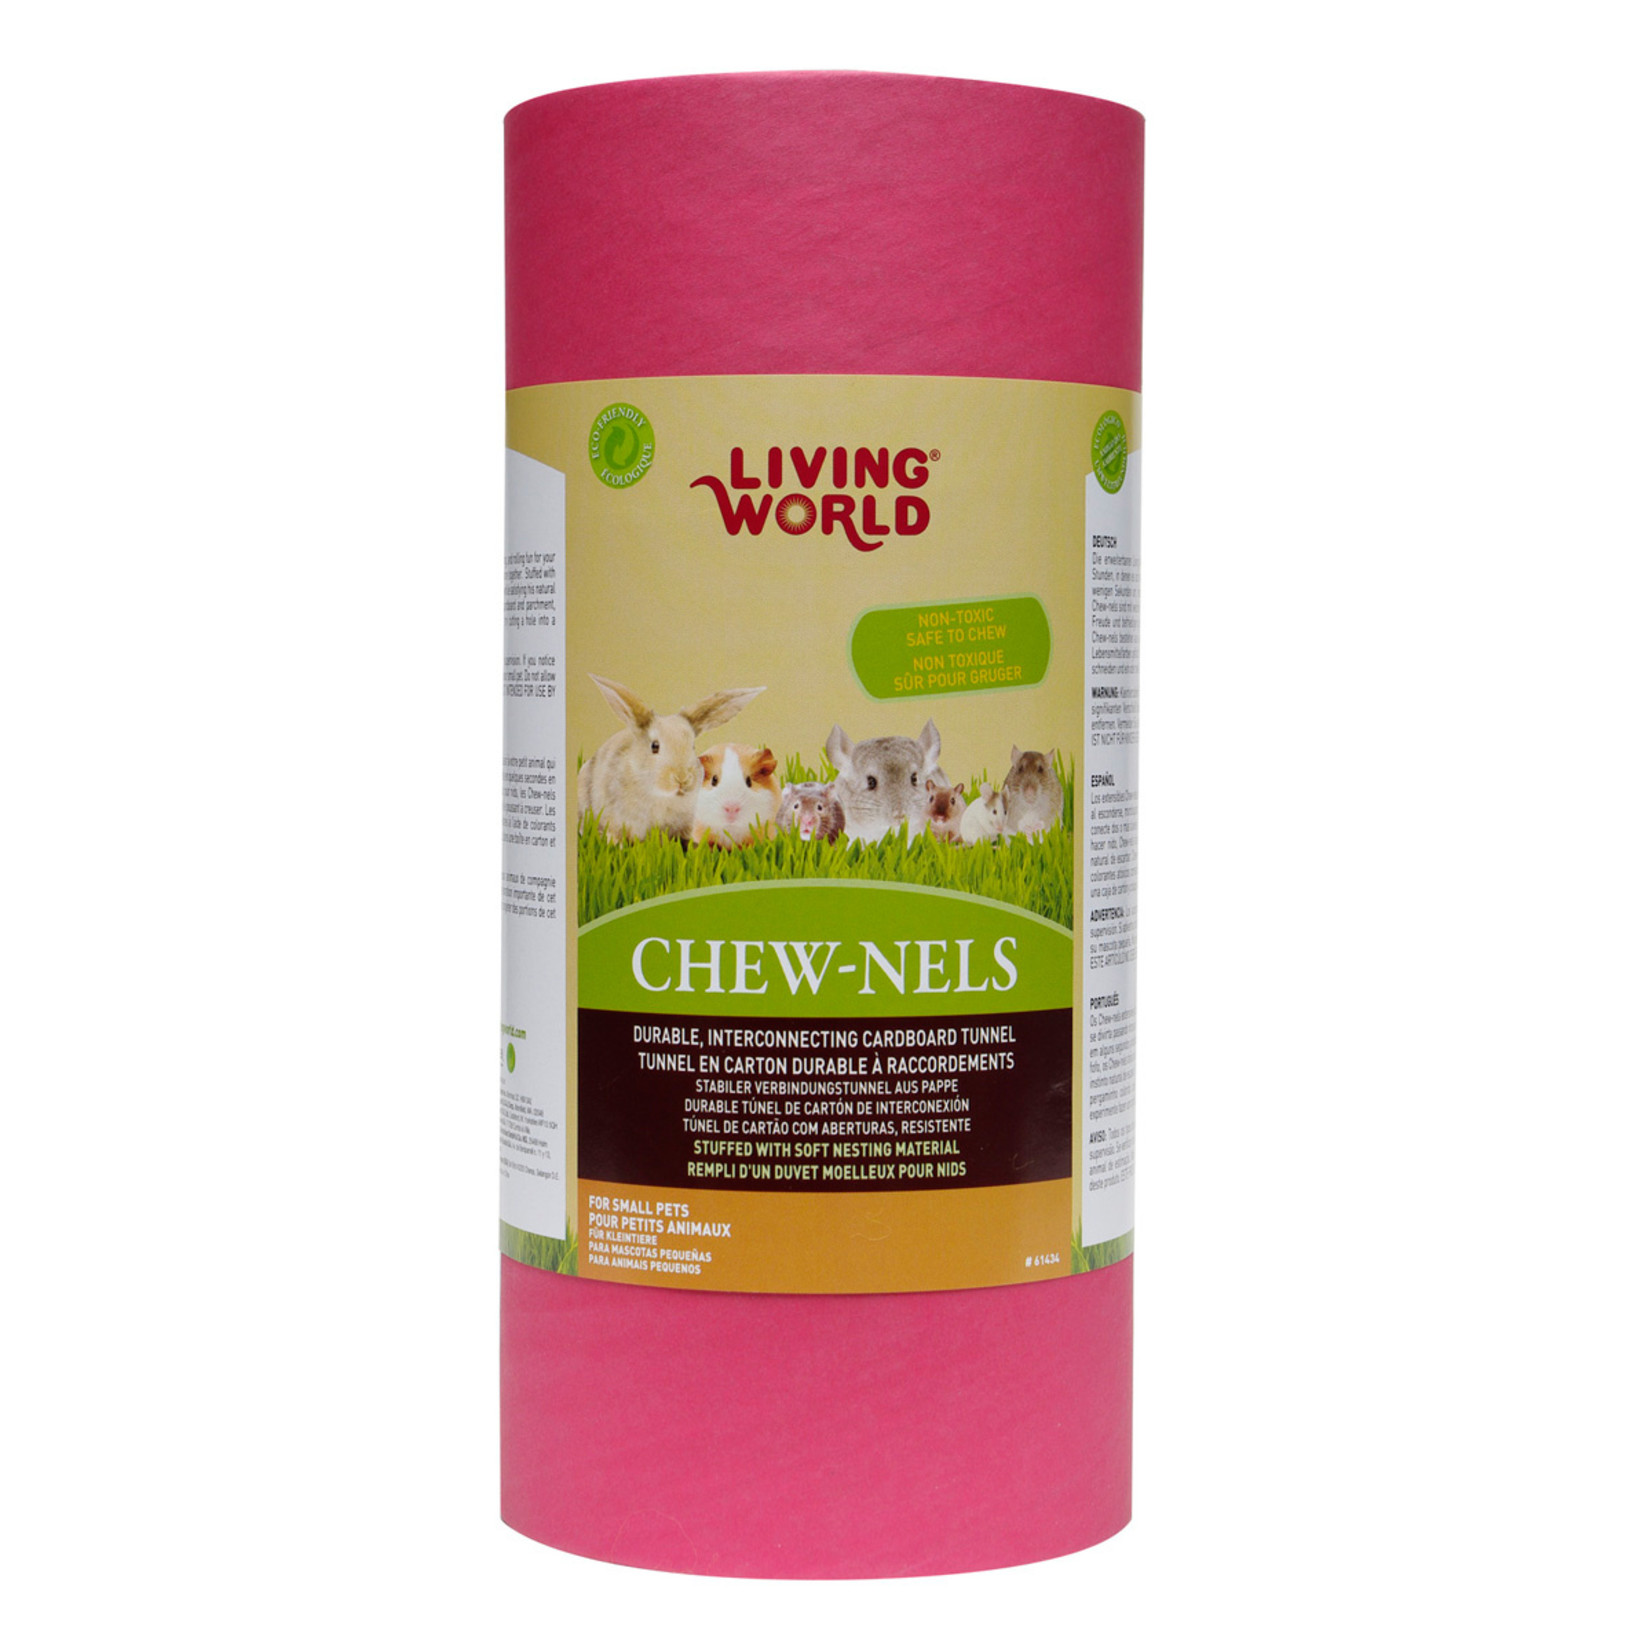 LIVING WORLD Living World Colourful Cardboard Chew-nels with Nesting material - Medium